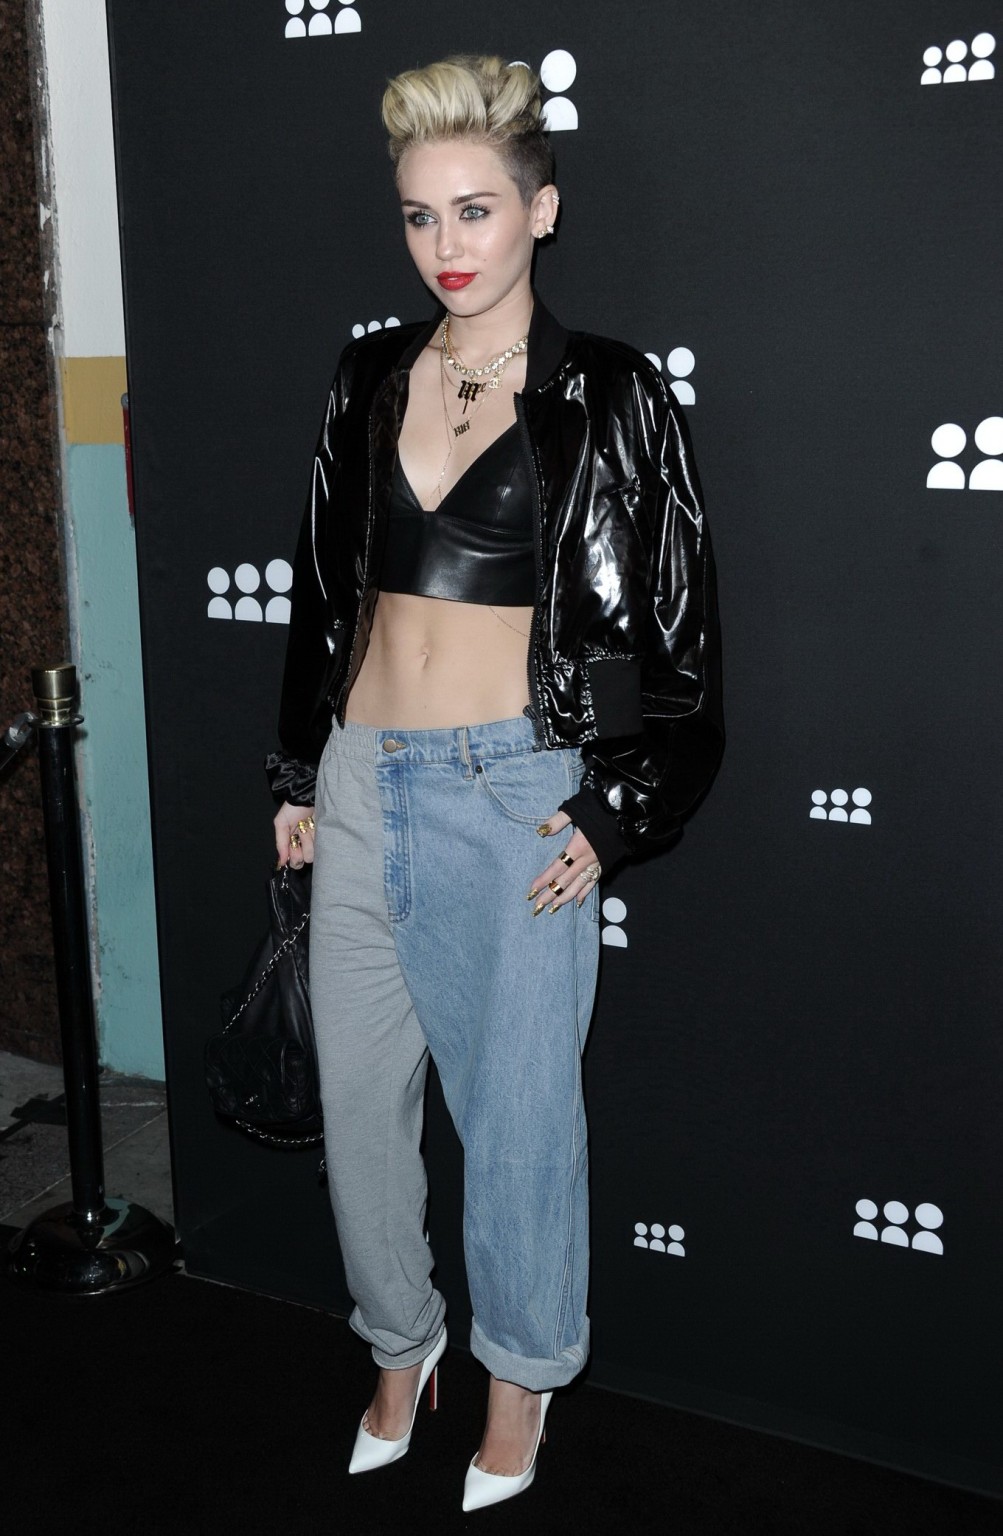 Miley Cyrus wearing a leather crop top at the Myspace launch event #75228755